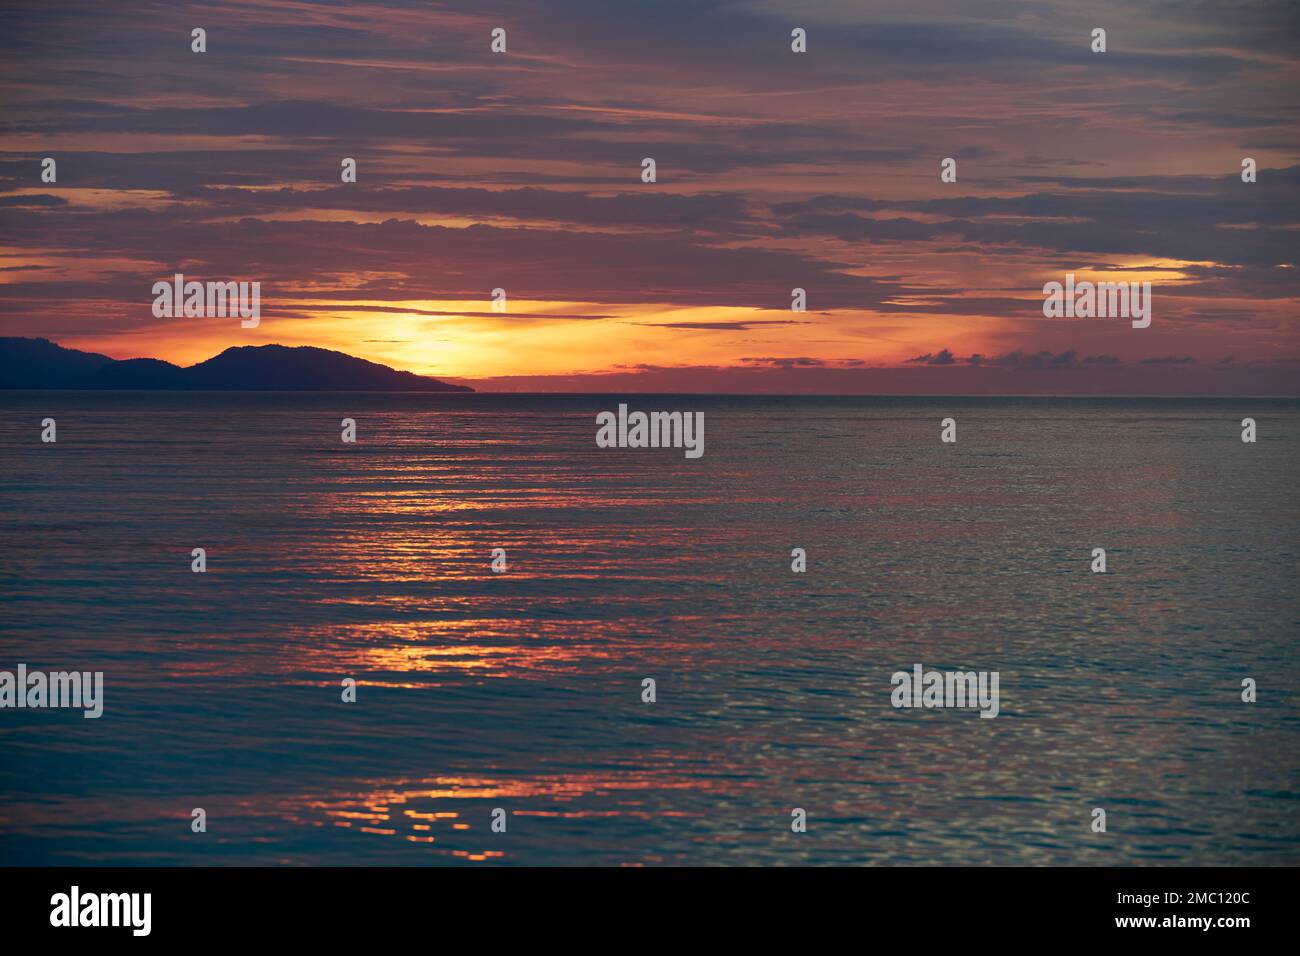 The sun going down over Raja Ampat Islands, Indonesia Stock Photo